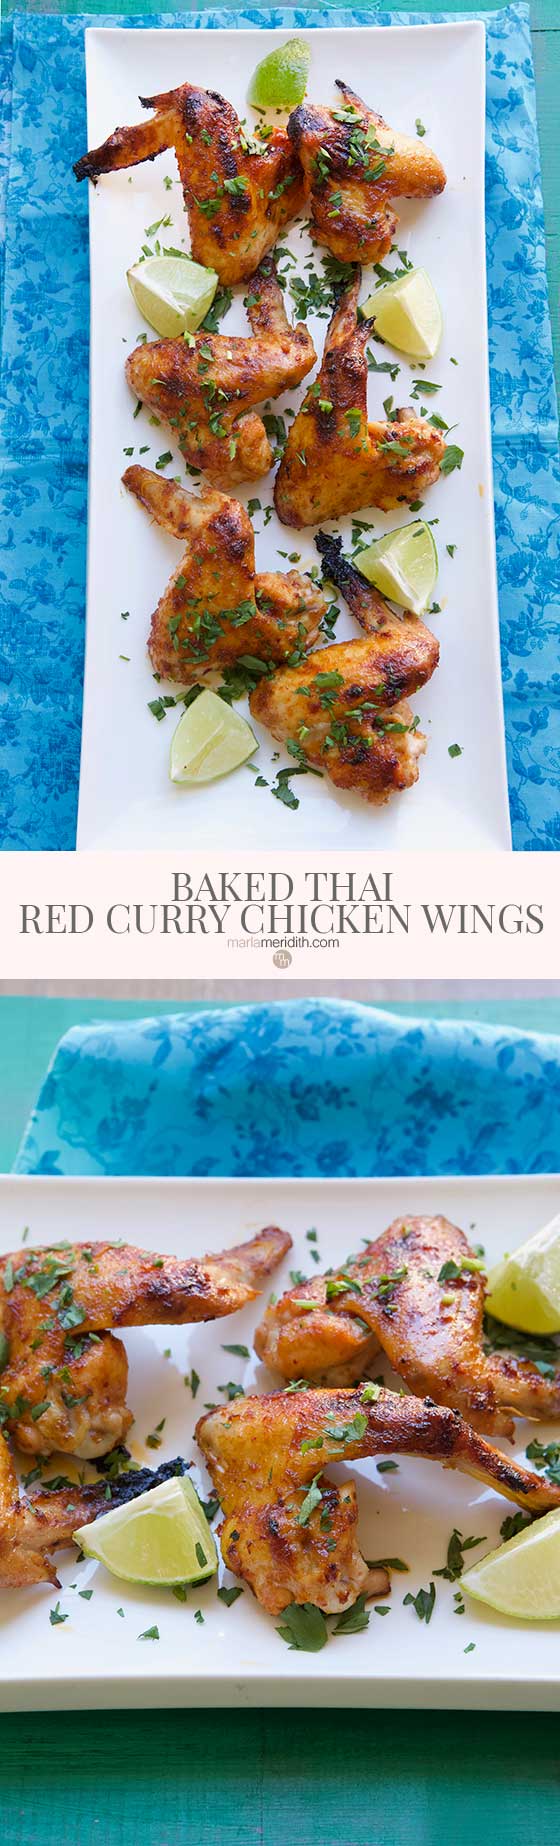 Your entire family will love this Baked Thai Red Curry Chicken Wings recipe, quick and simple to prepare for dinner, potlucks or any celebration! MarlaMeridith.com